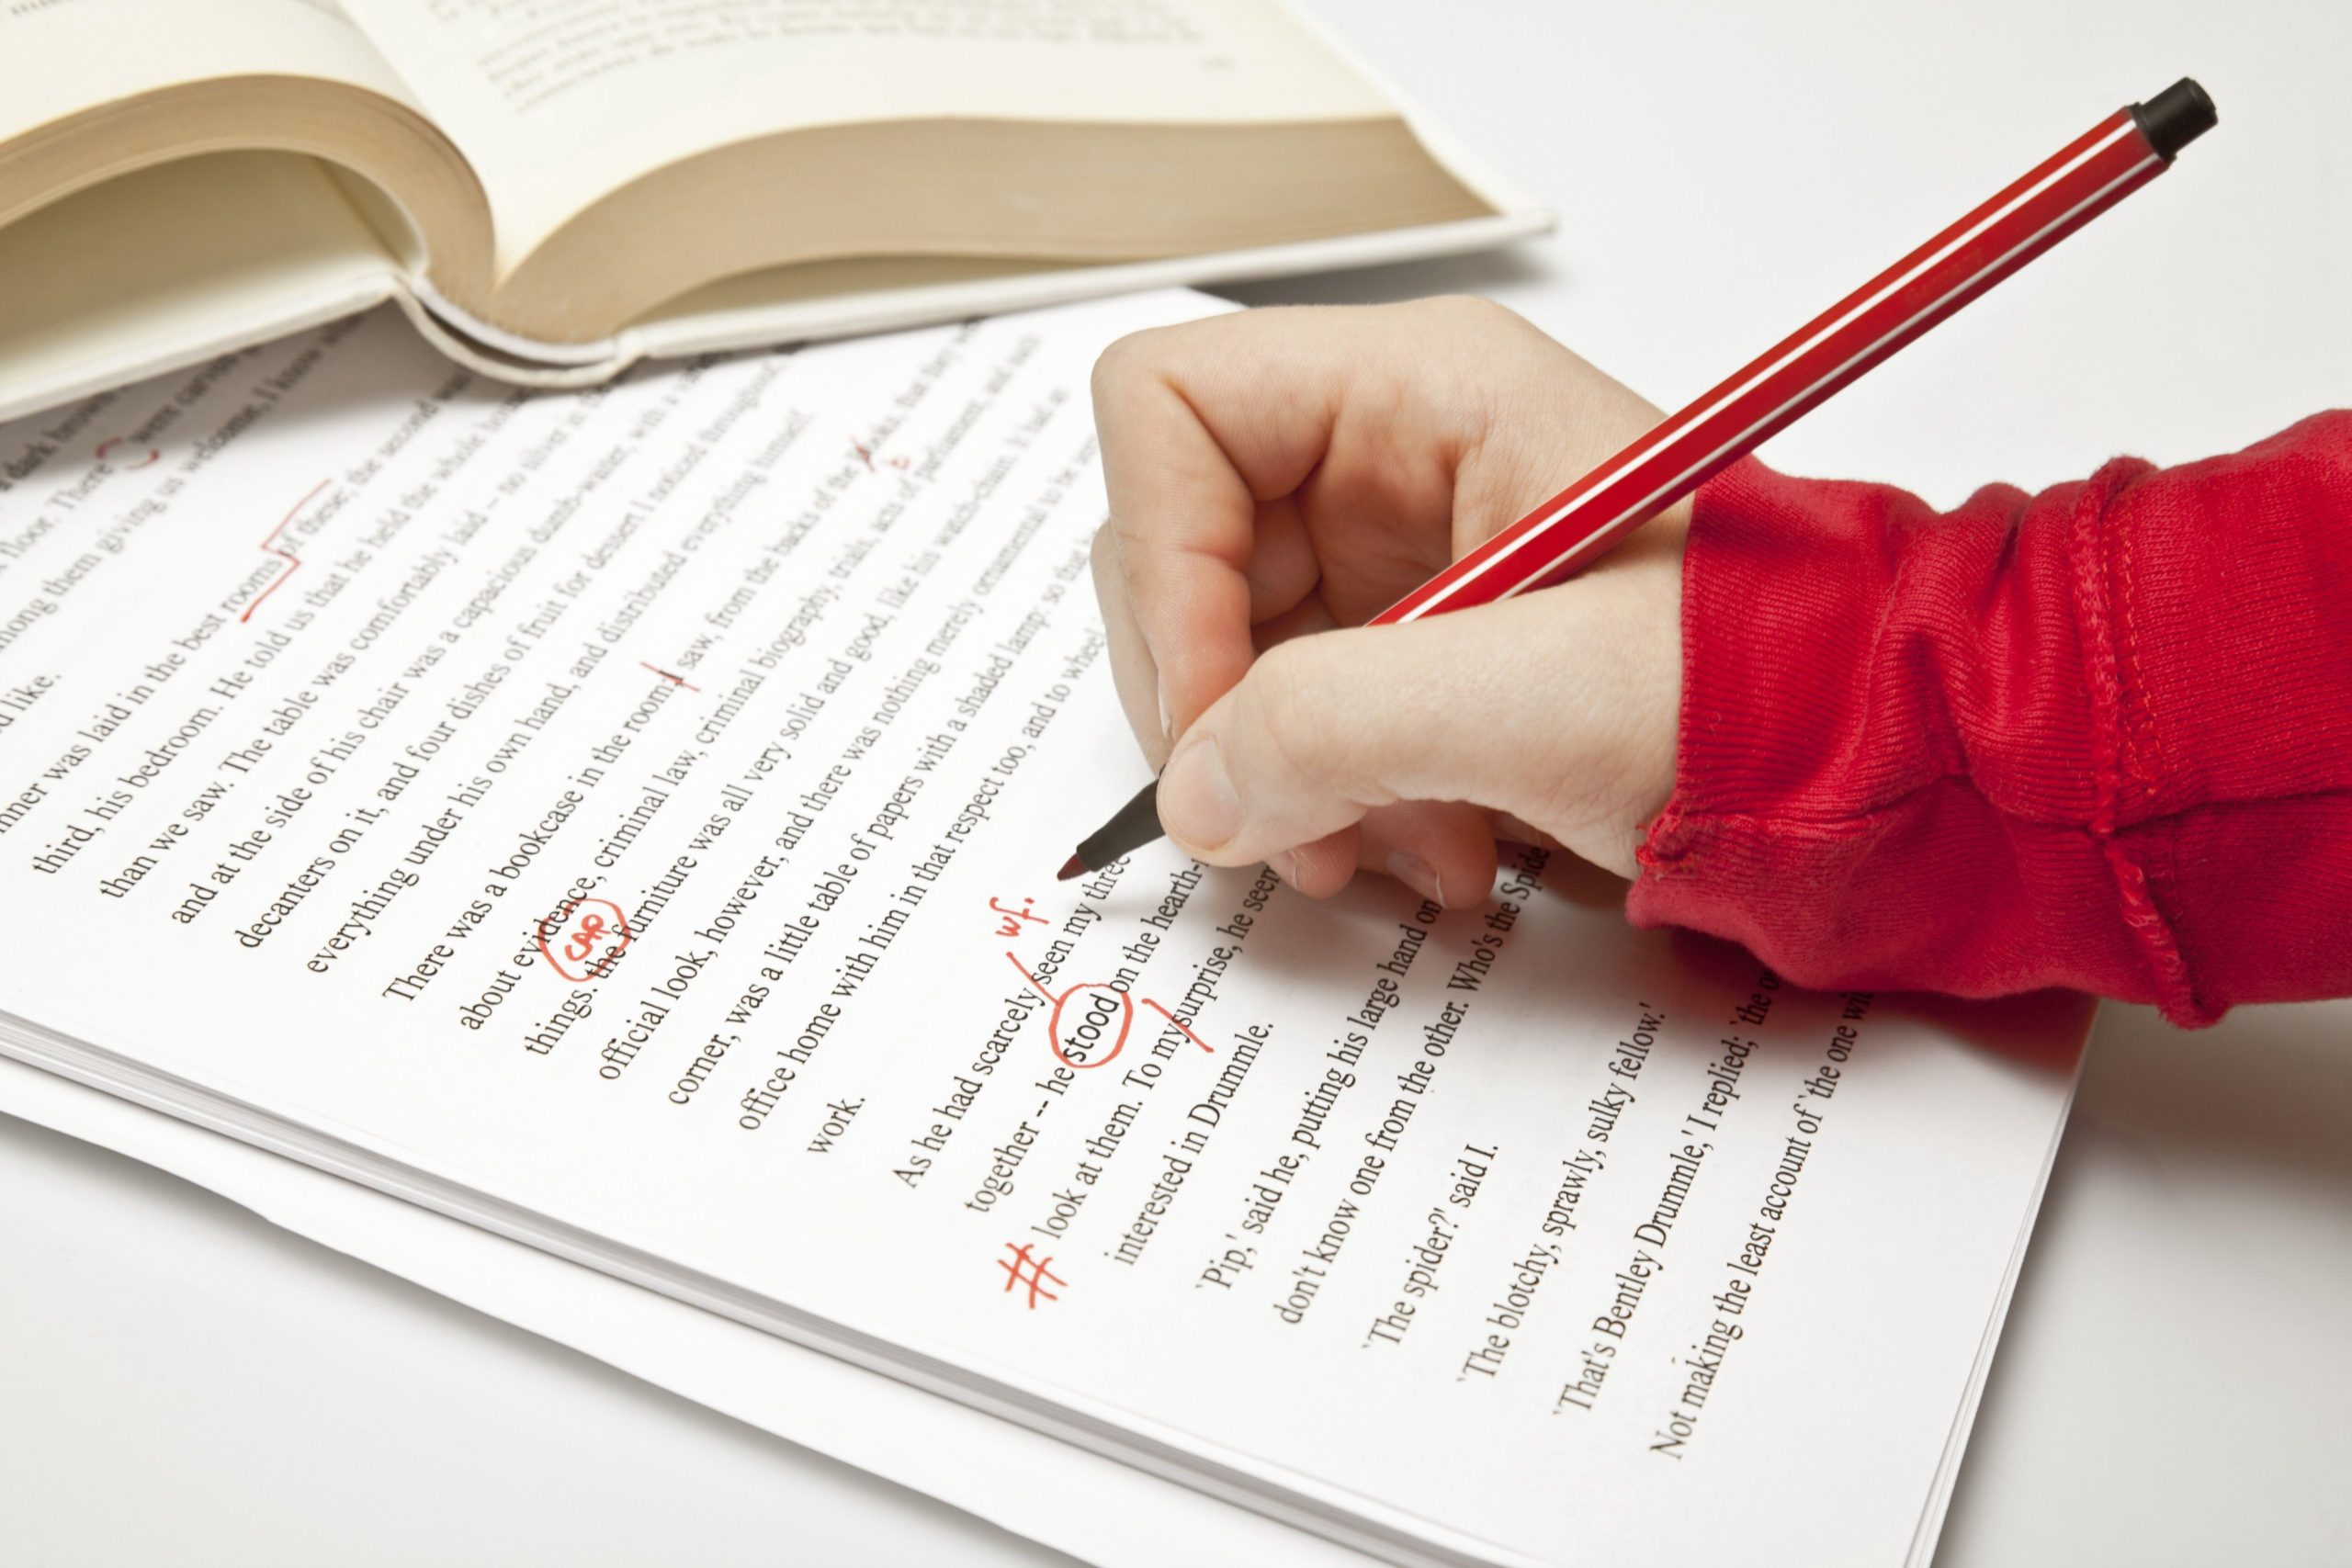 importance of proofreading in the writing process